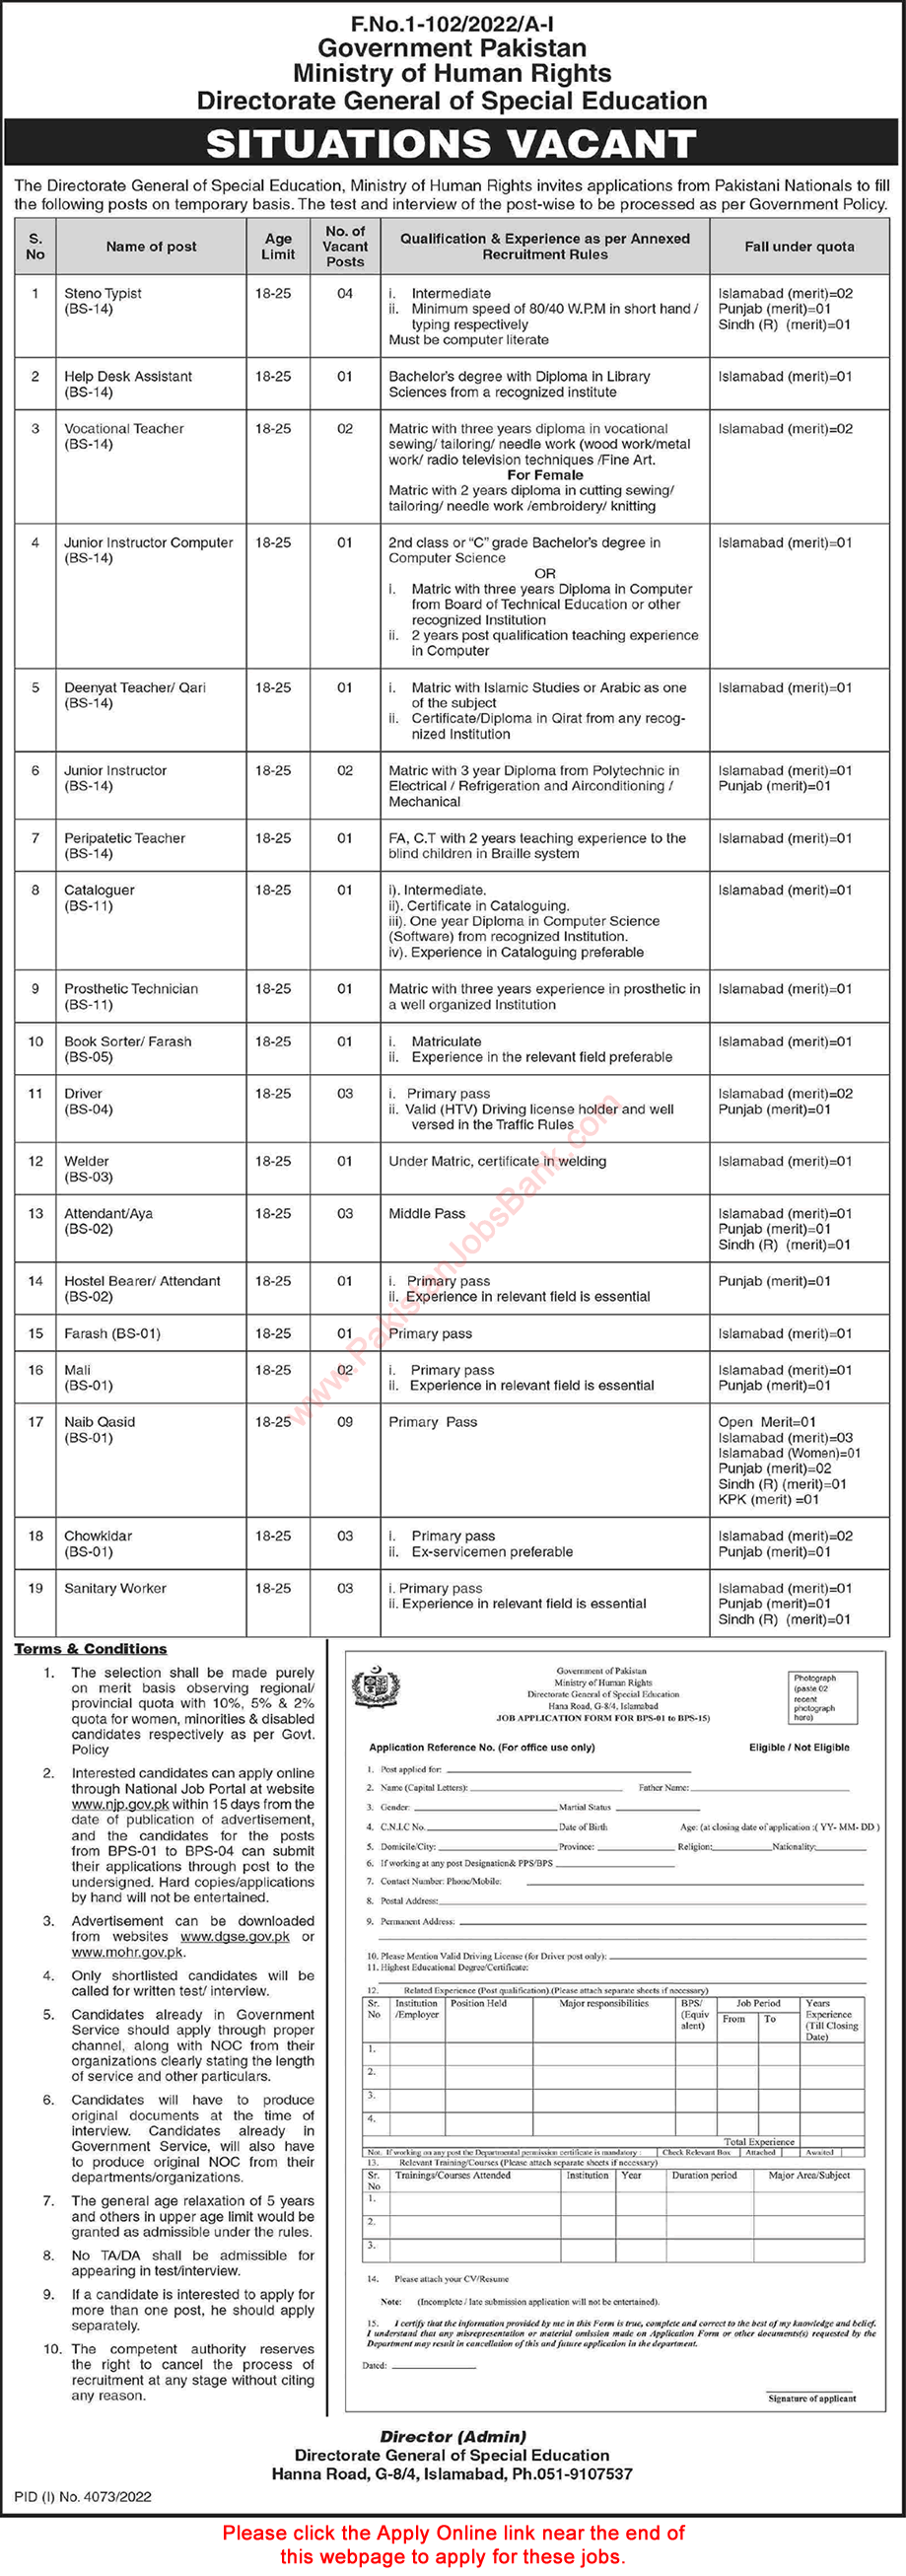 Directorate General of Special Education Jobs December 2022 / 2023 NJP Apply Online Naib Qasid & Others Latest